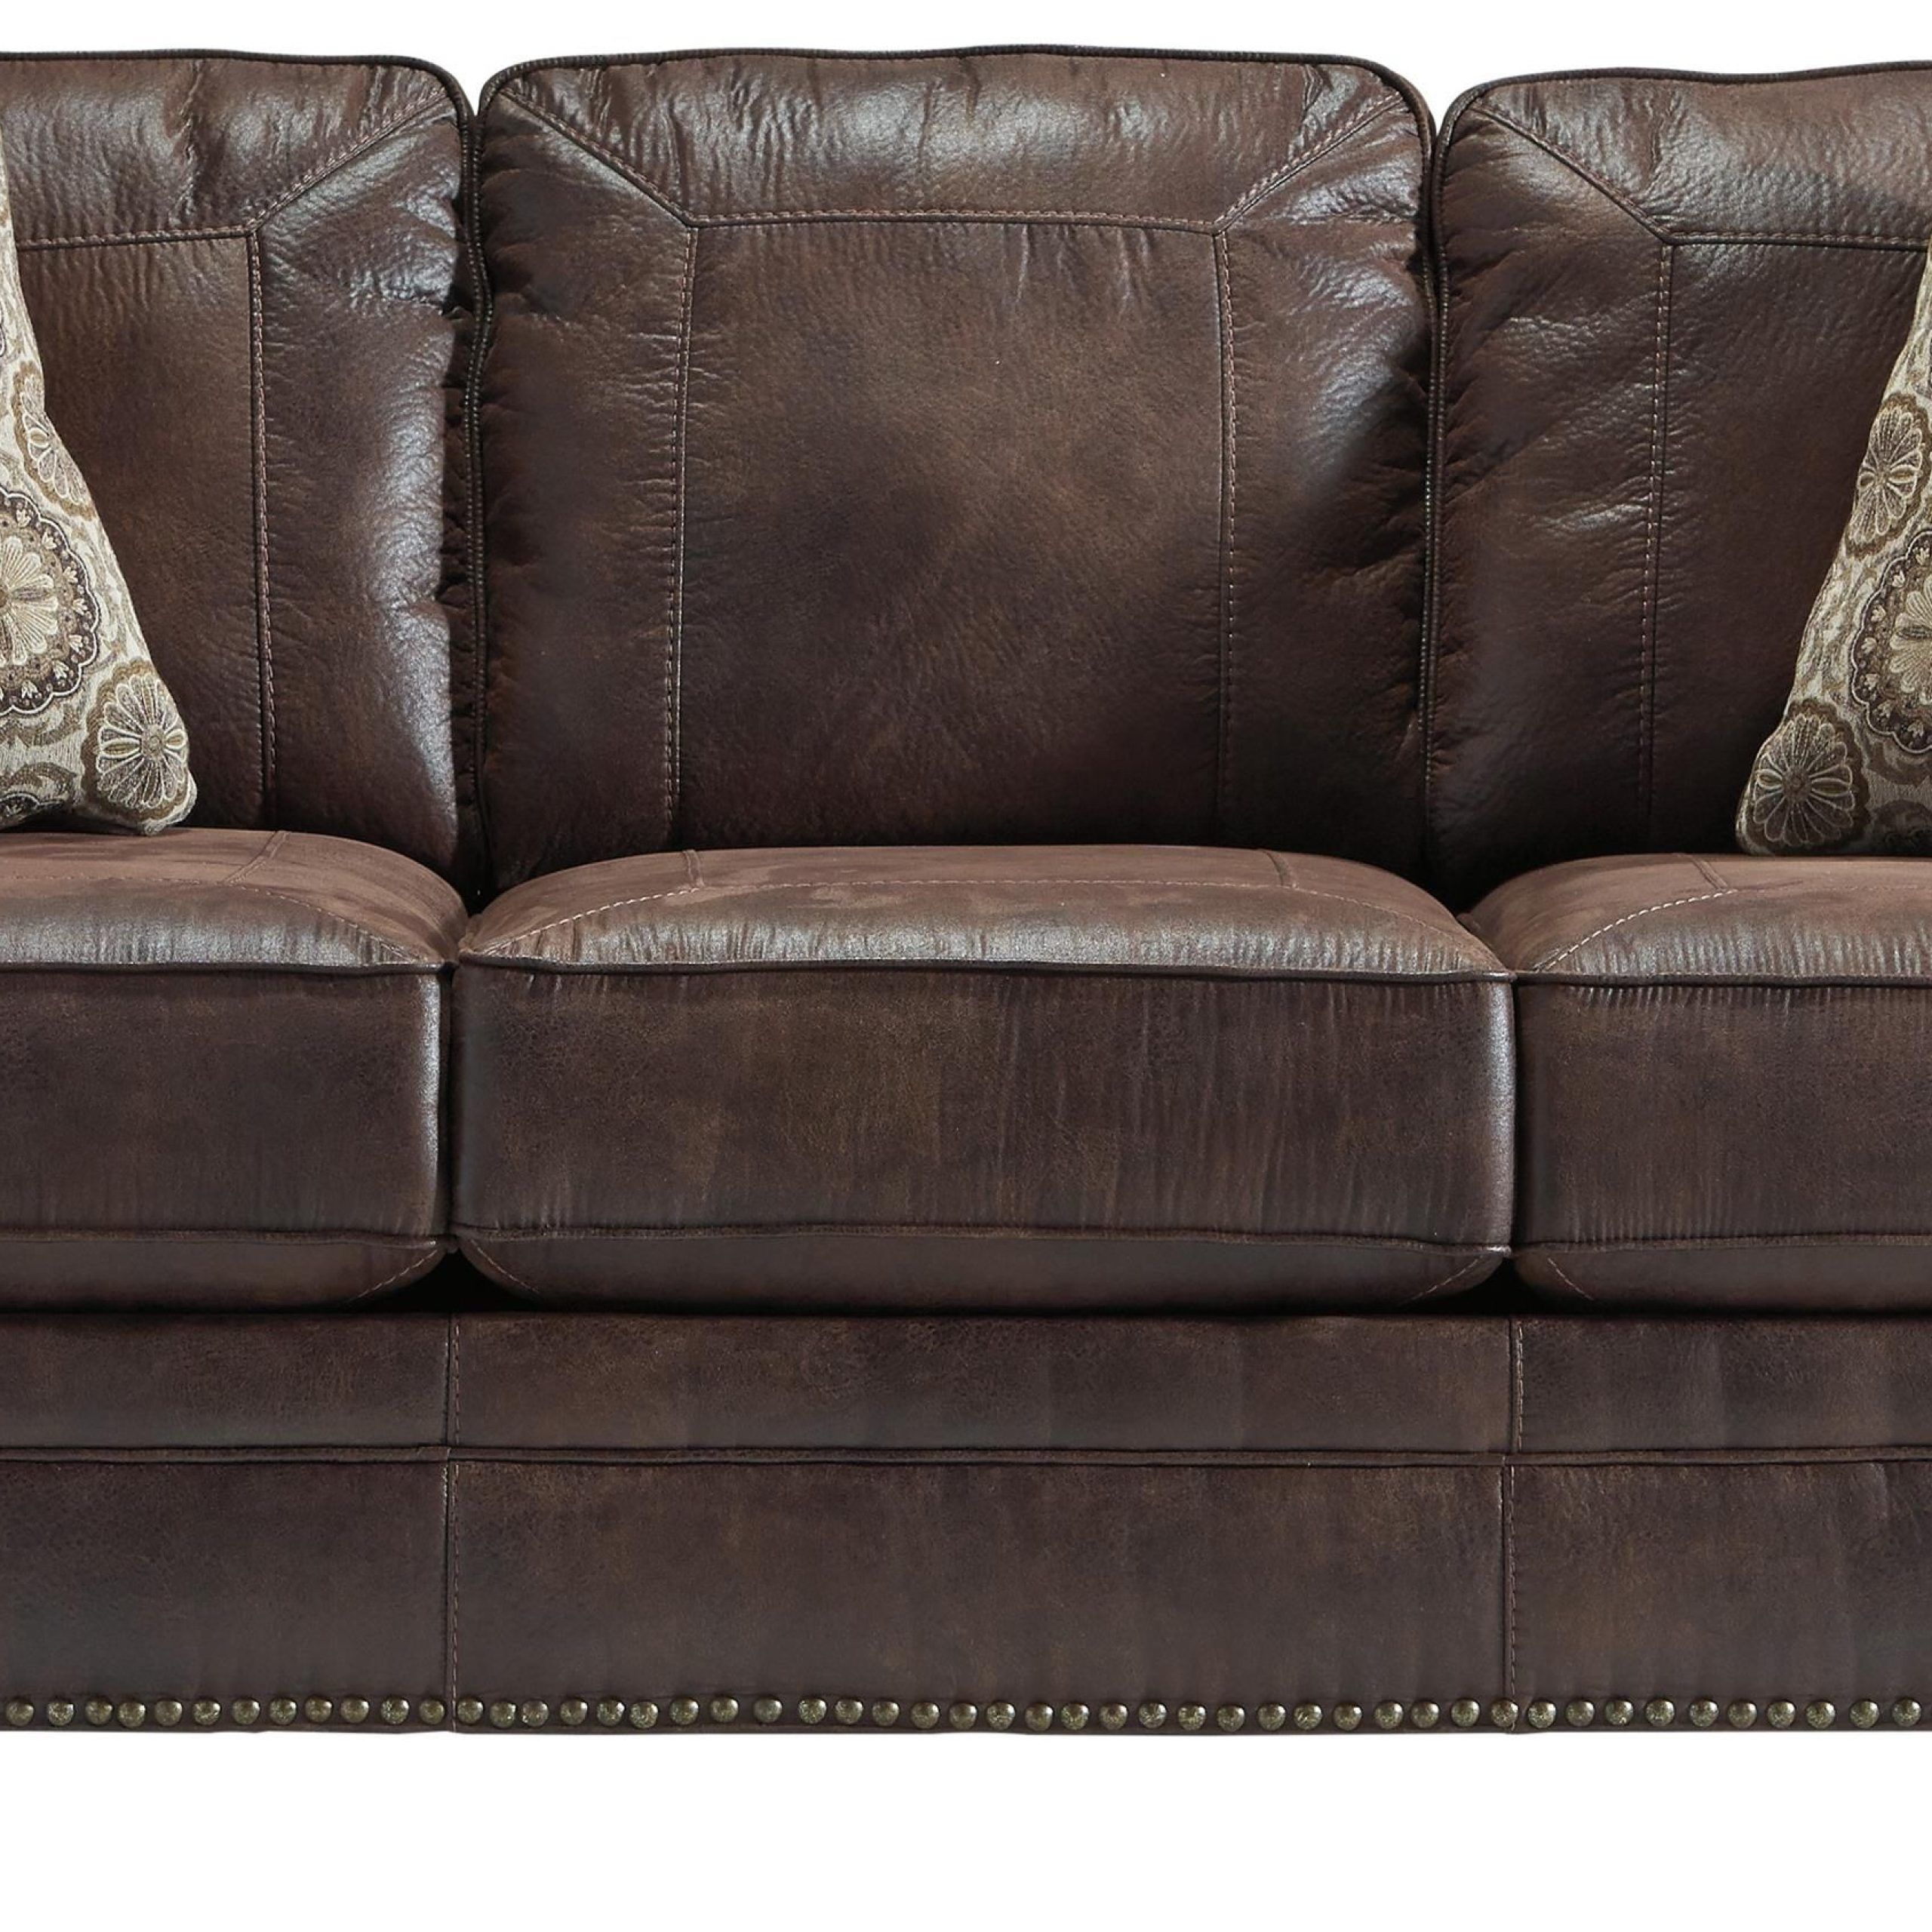 Beni Queen Sofa Sleepertrendz At Ruby Gordon Home | Faux Leather With Regard To Faux Leather Sofas In Dark Brown (Gallery 11 of 20)